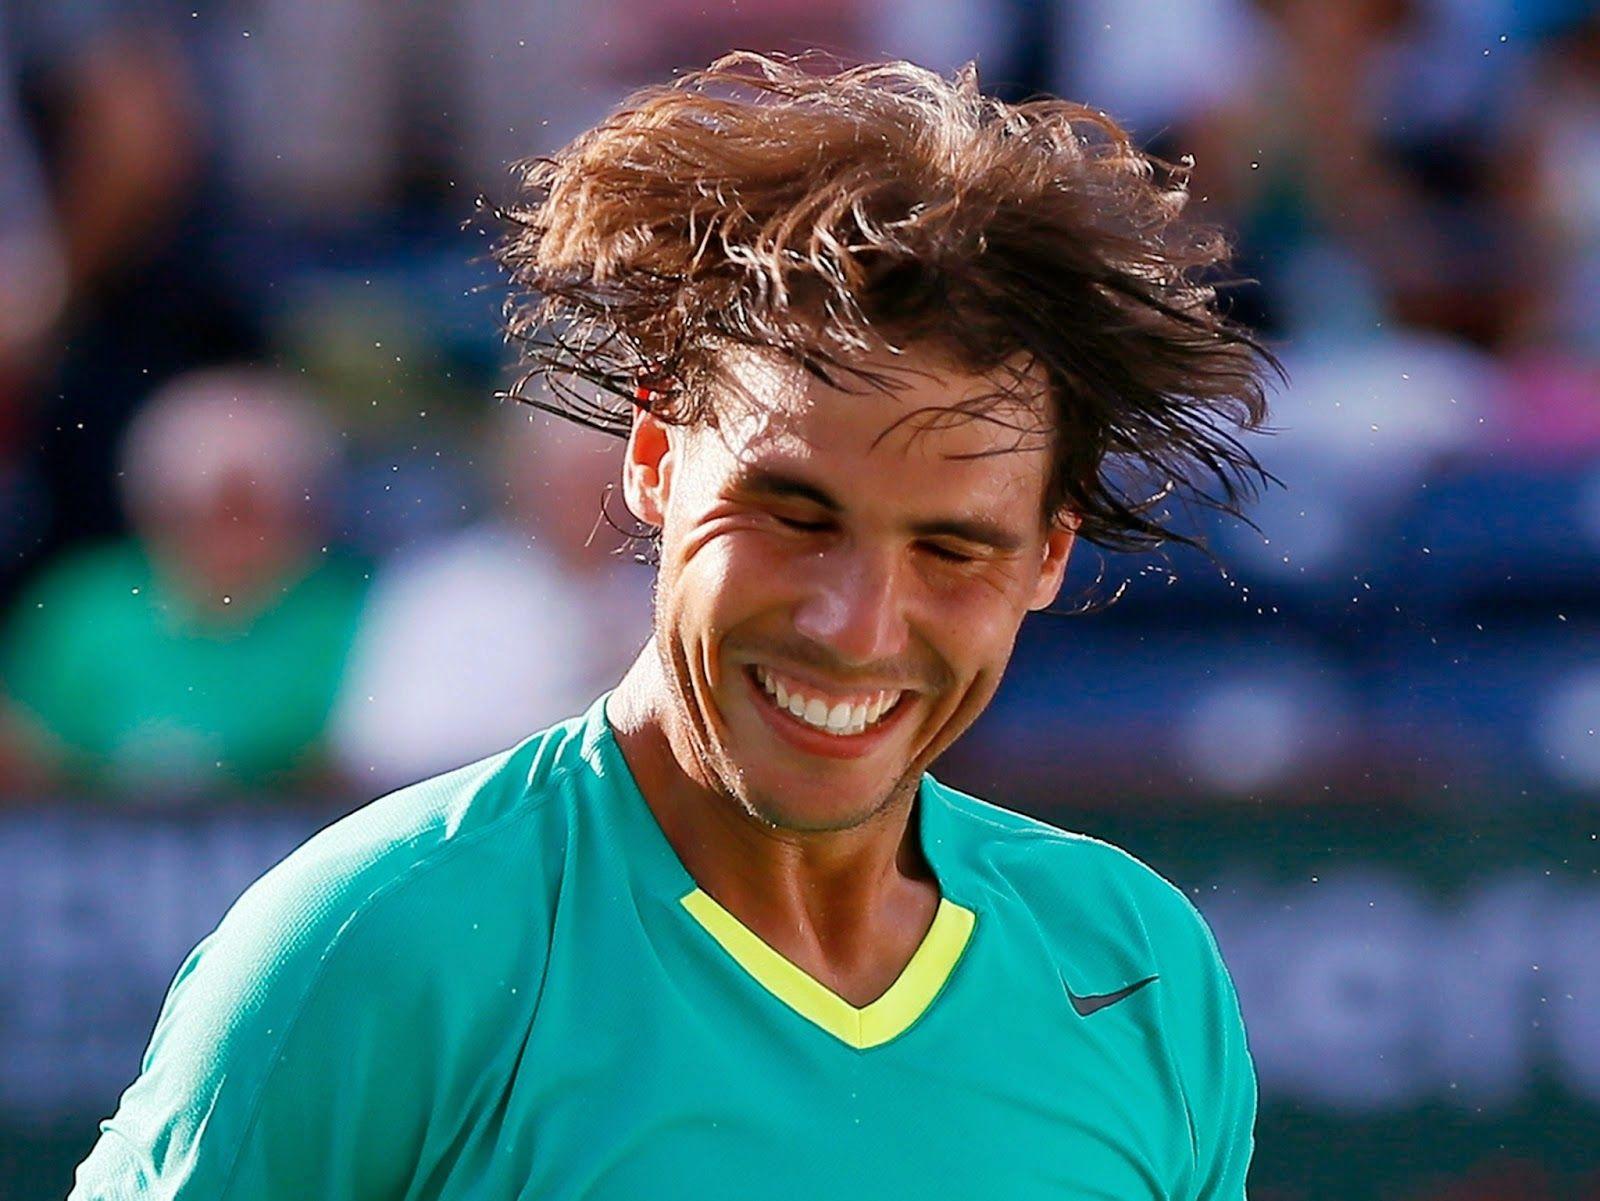 French Open 2014 Champion Rafael Nadal New HD Wallpaper and Photo